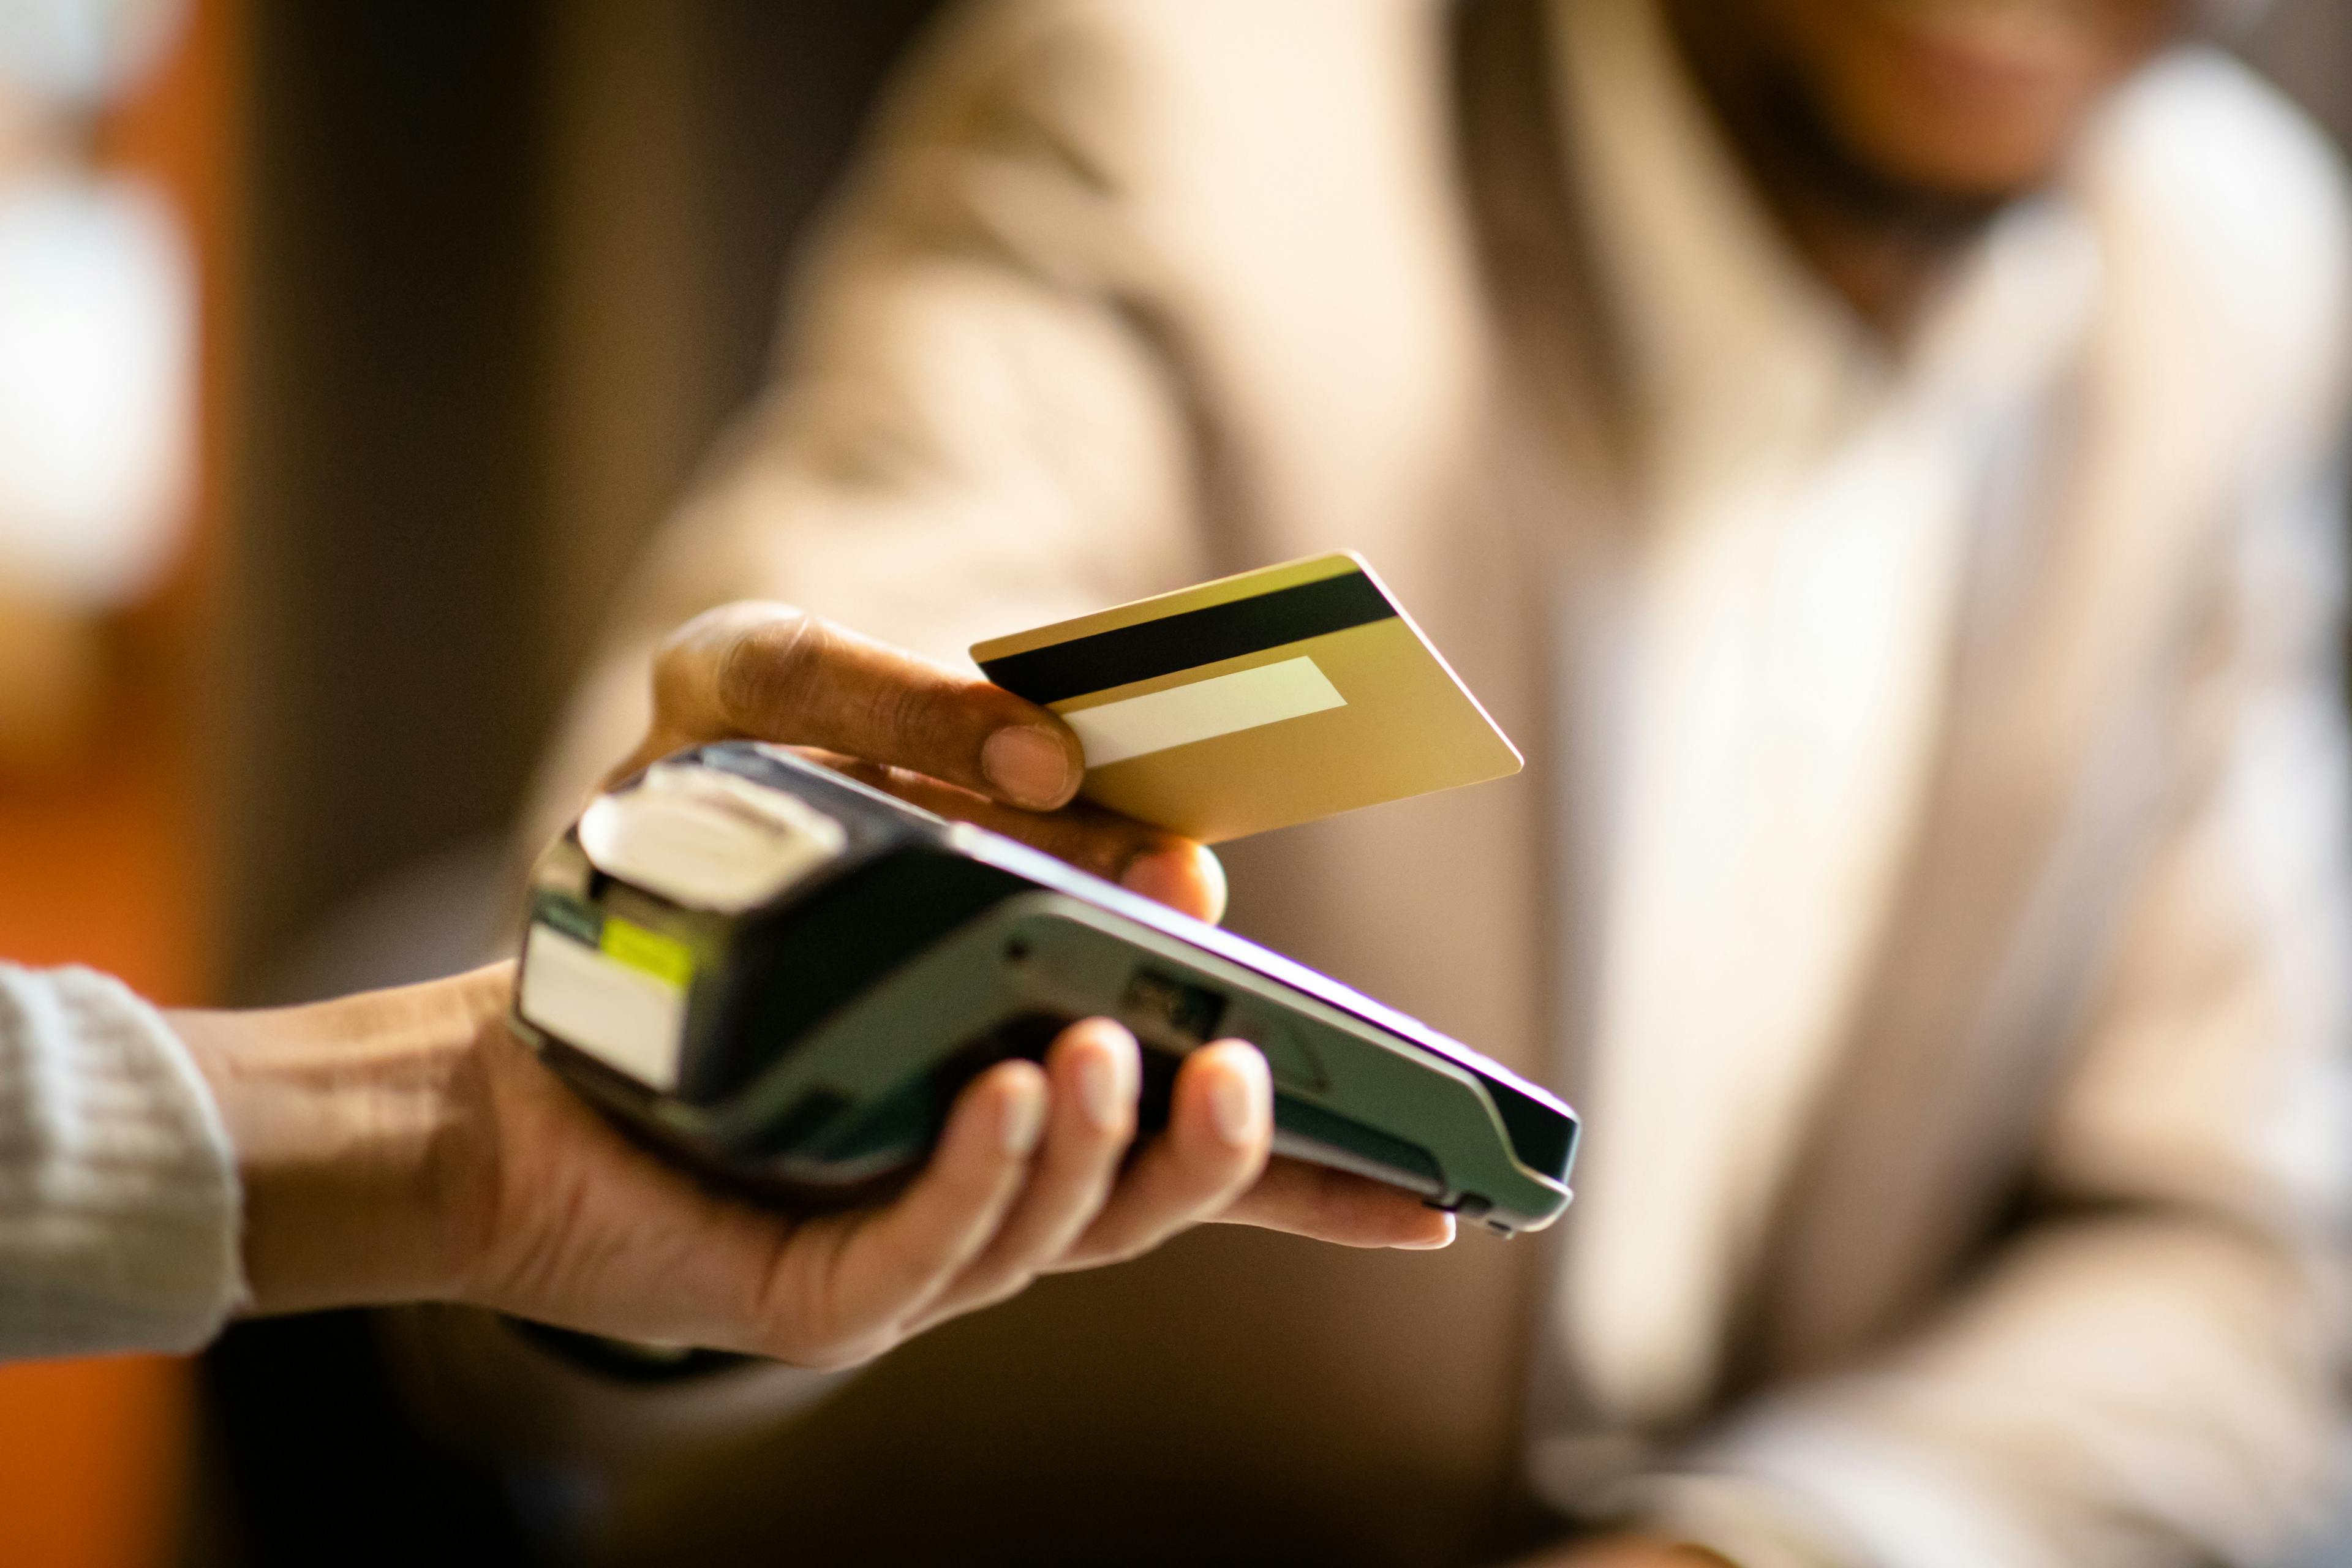 How To Accept Card Payments Without a Merchant Account